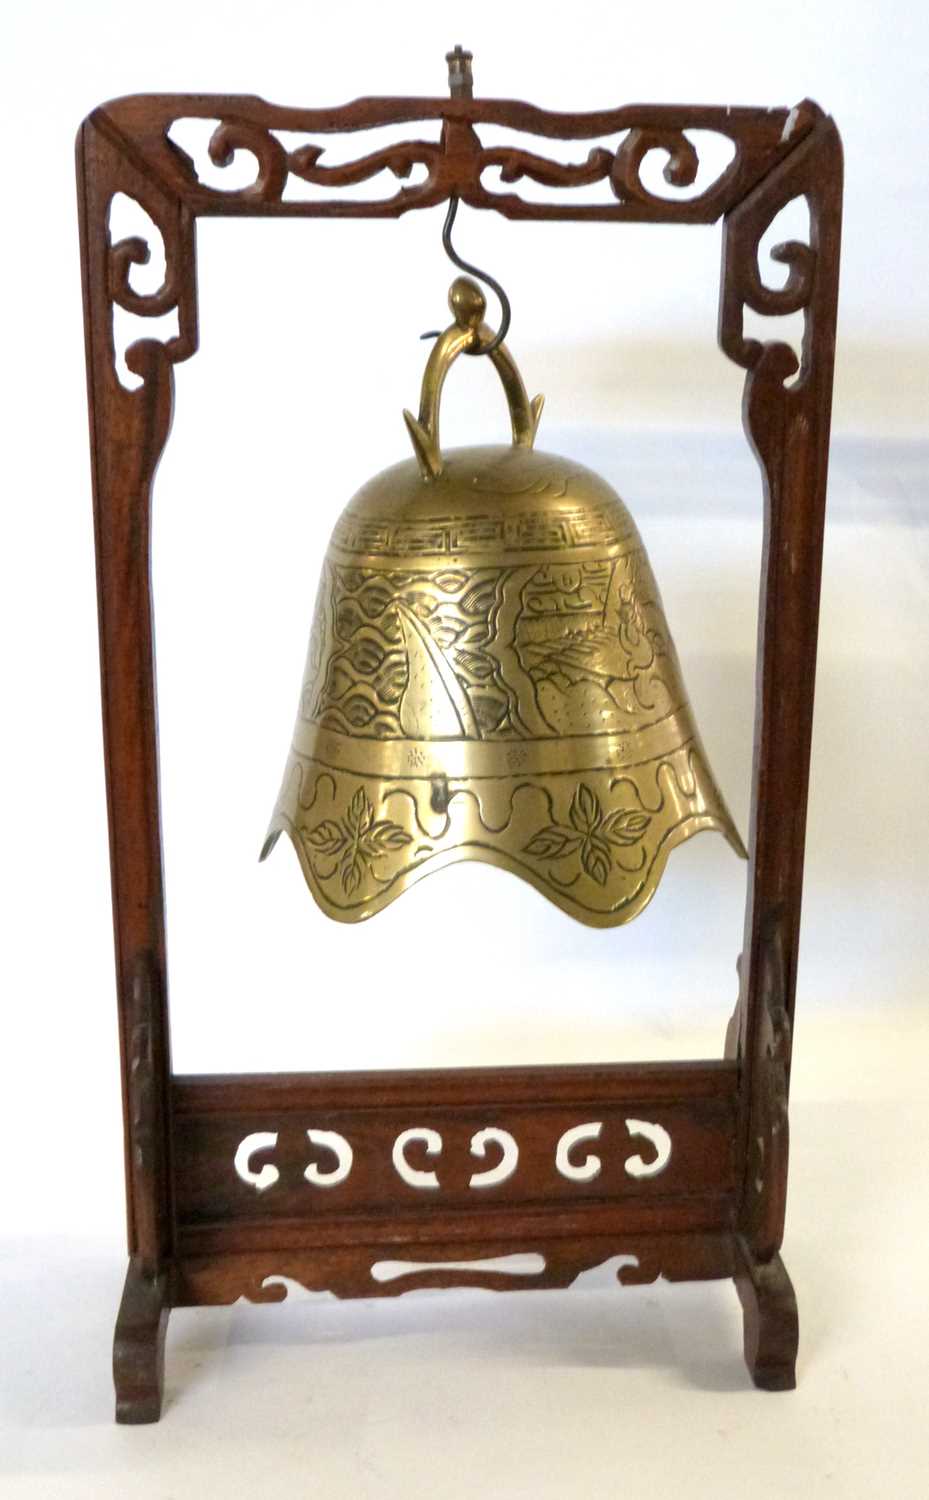 A Chinese Tibetan temple bell, engraved with dragons, with its carved hardwood stand